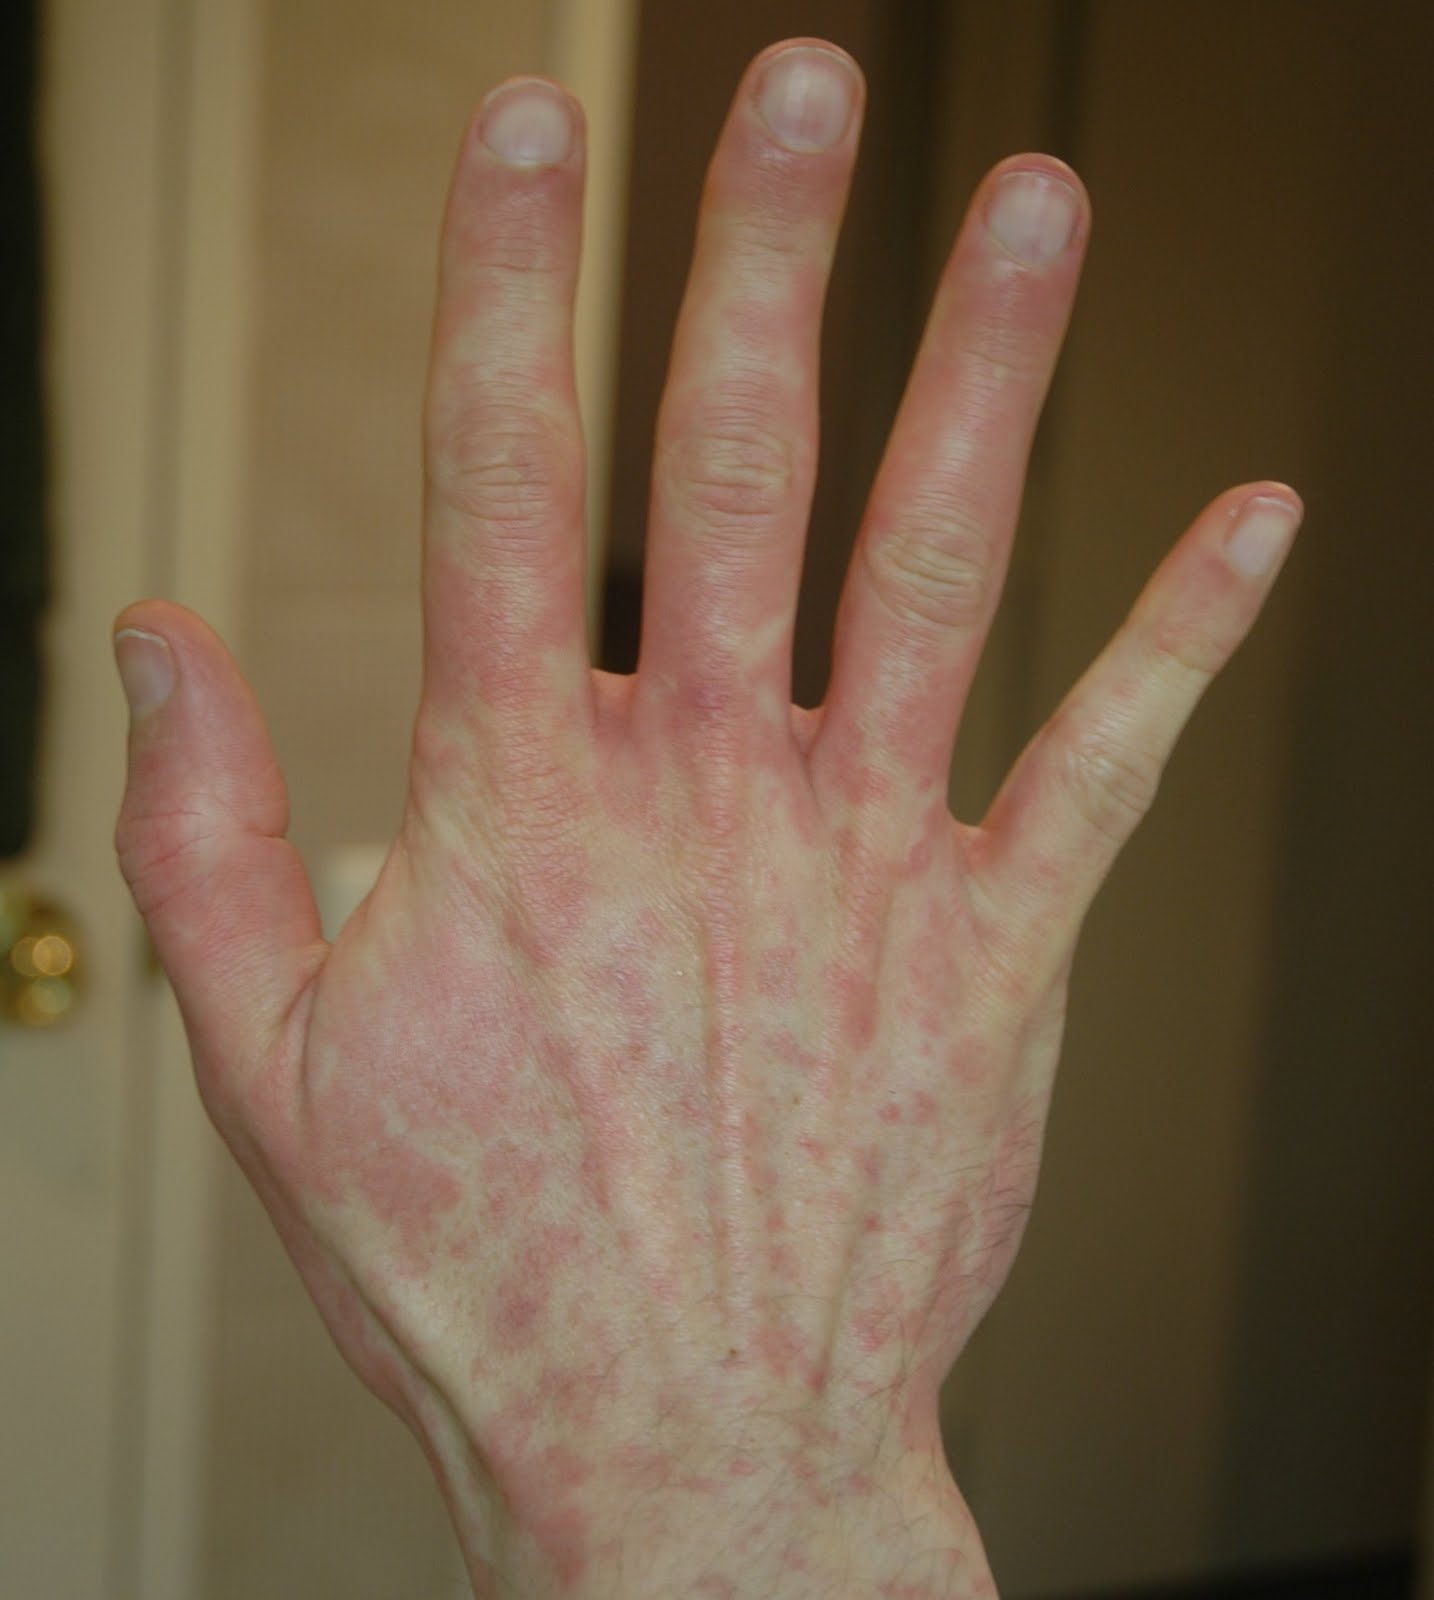 The top of my hands get an itchy rash, but only there ...